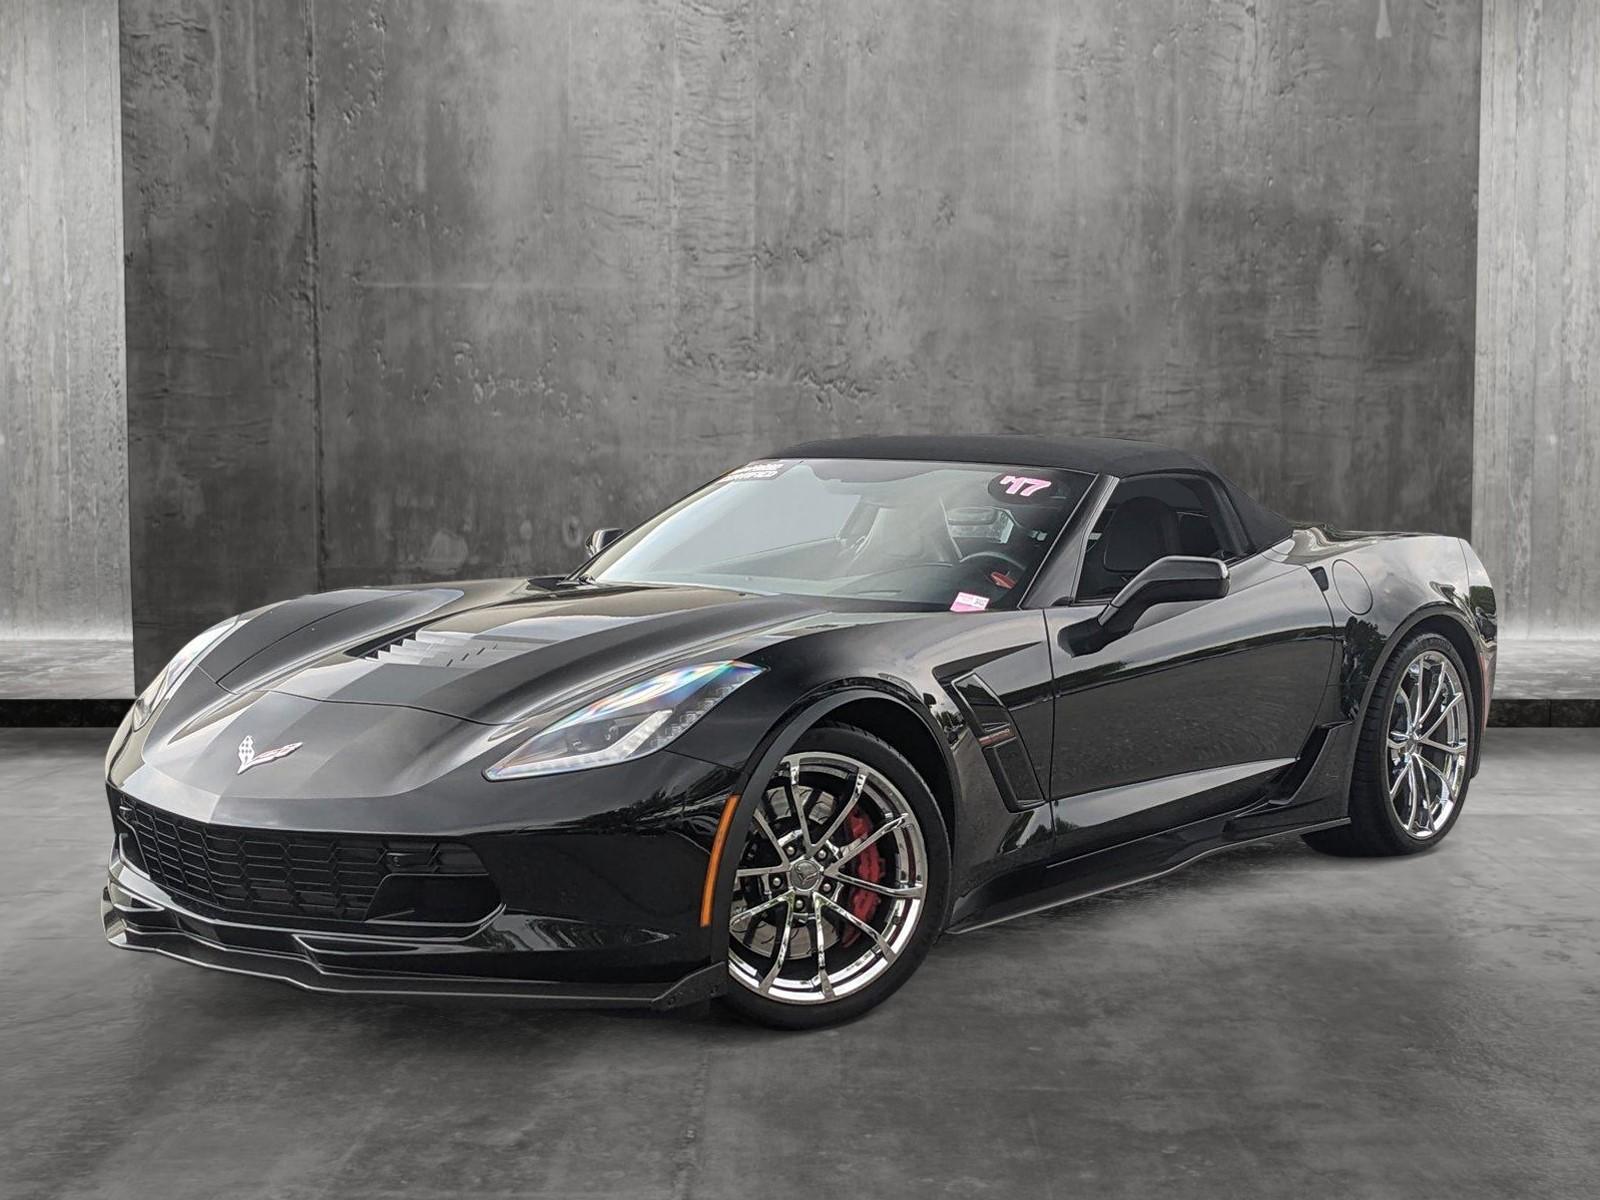 2017 Chevrolet Corvette Vehicle Photo in Towson, MD 21204